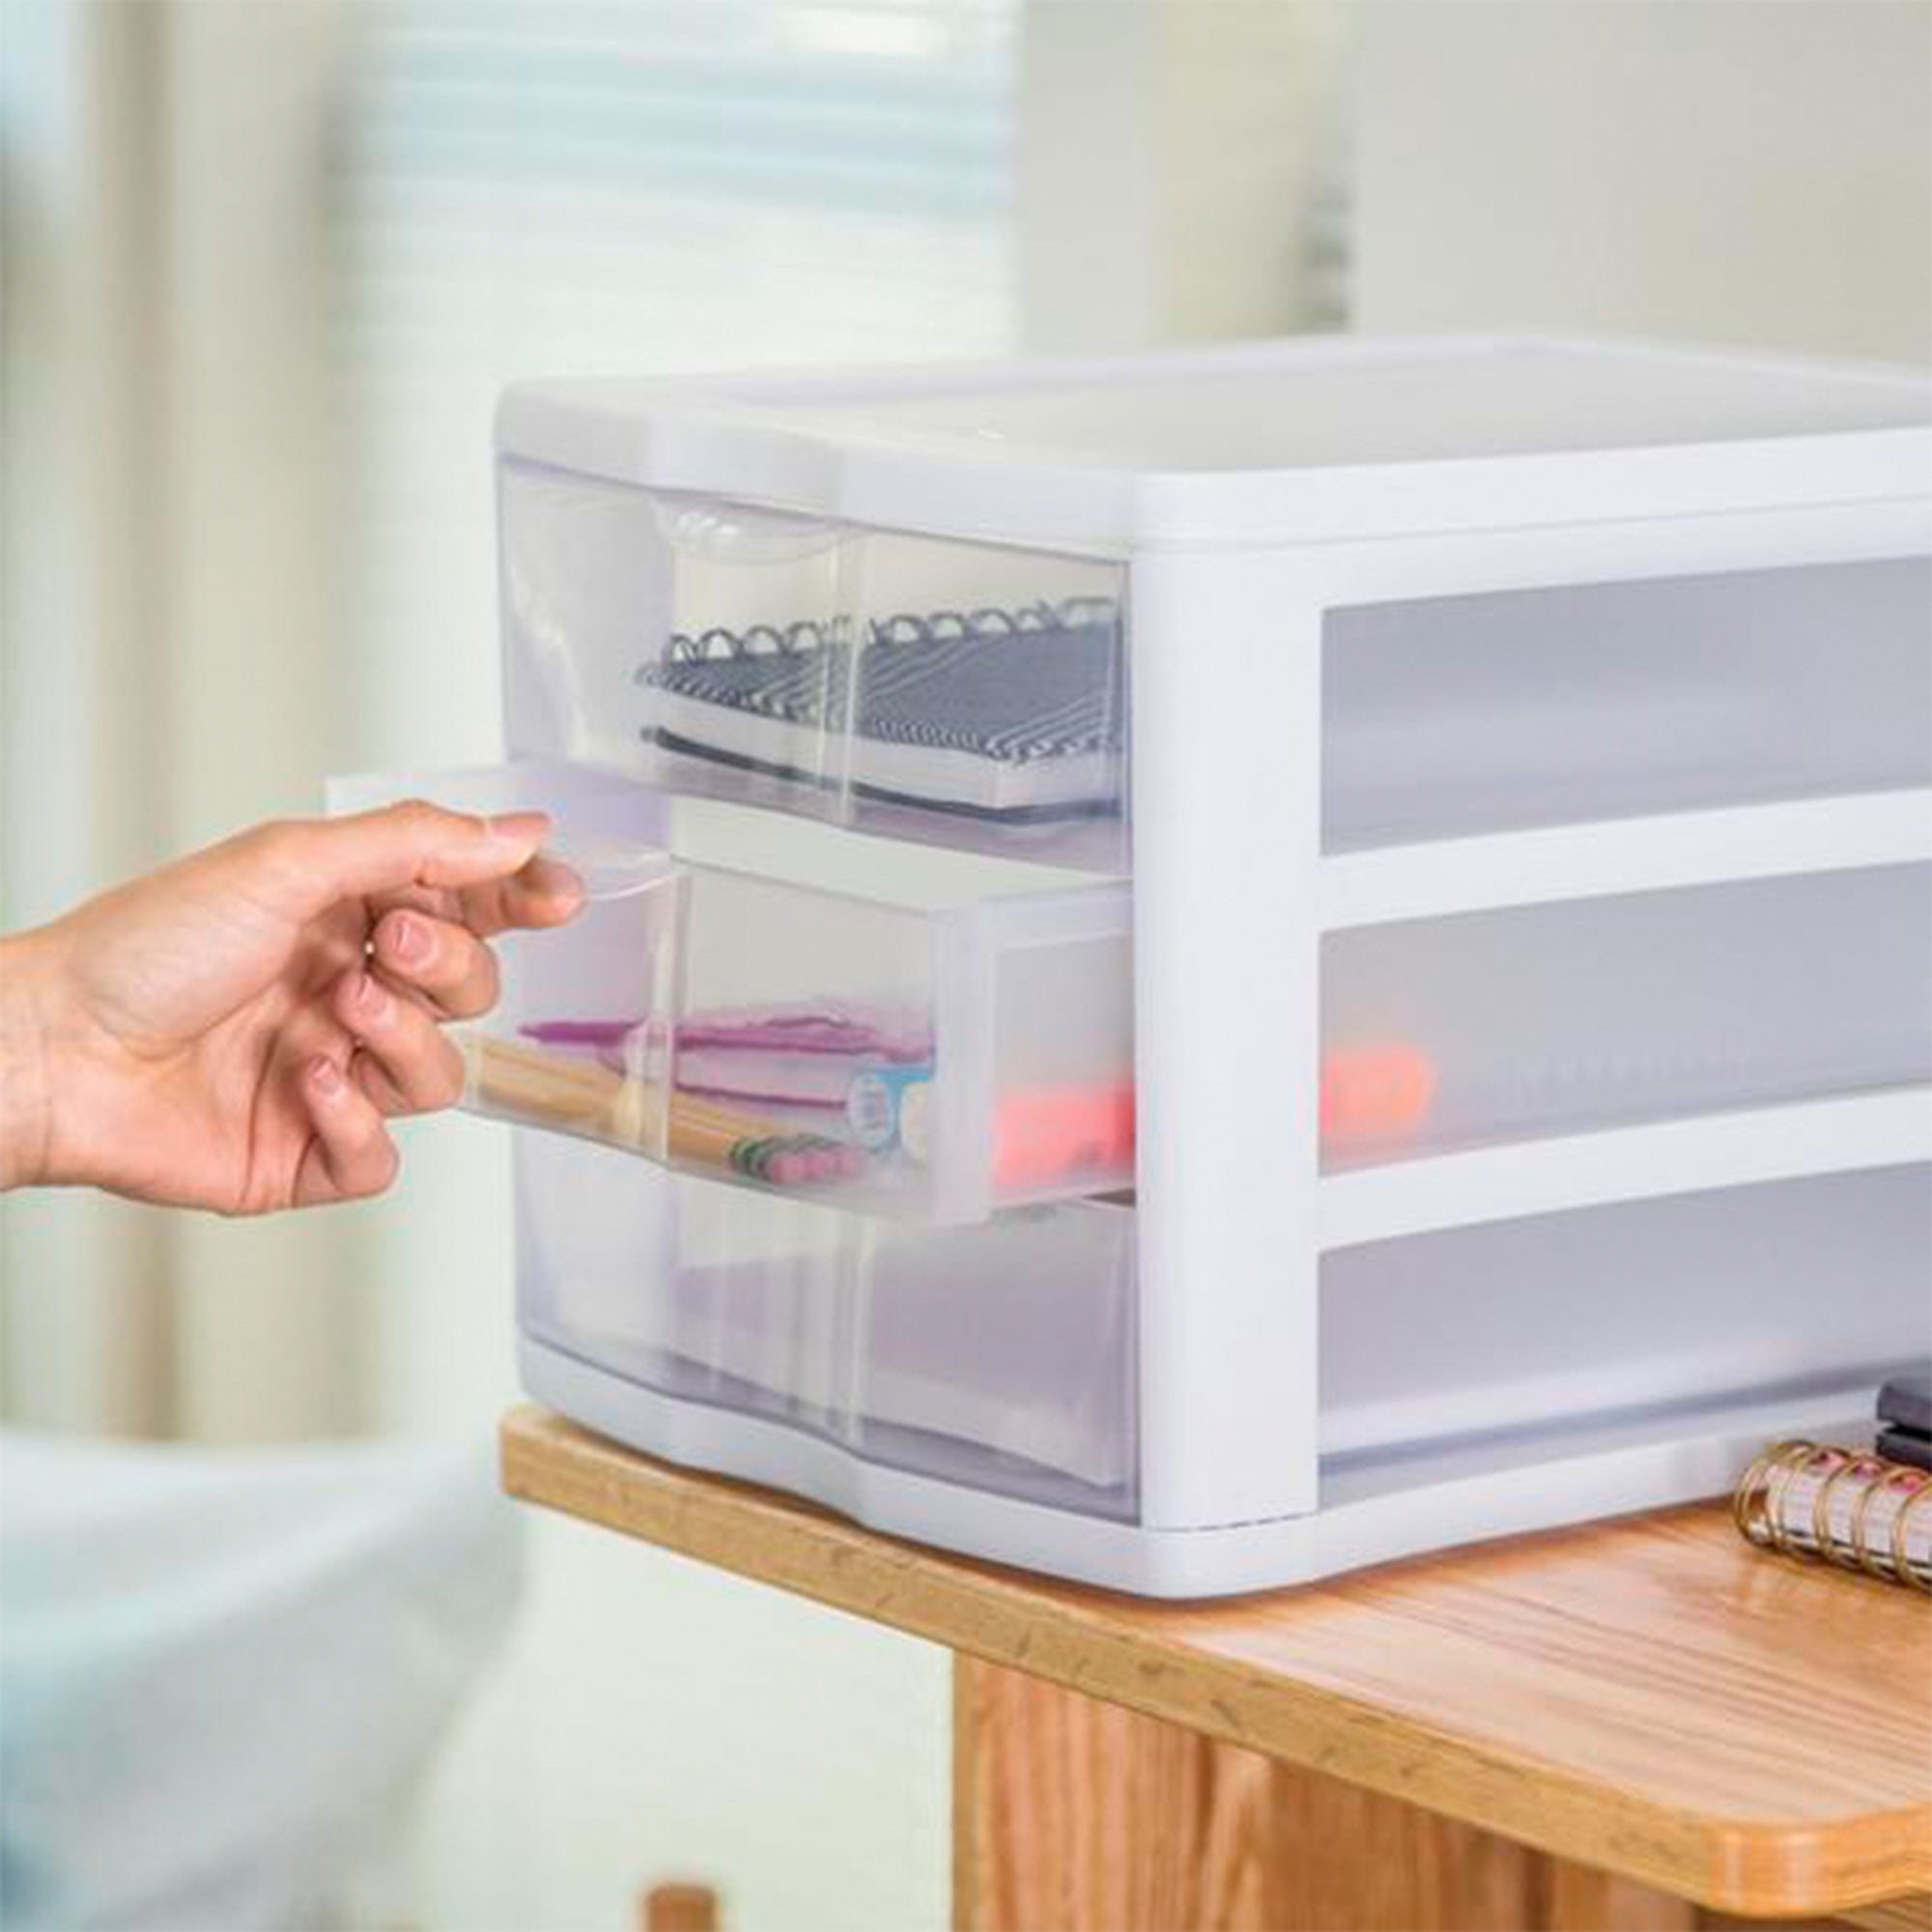 Sterilite ClearView 3-Drawer Wide Organizer - Clear/White, 14.6 x 14.5 x  10.6 in - Kroger